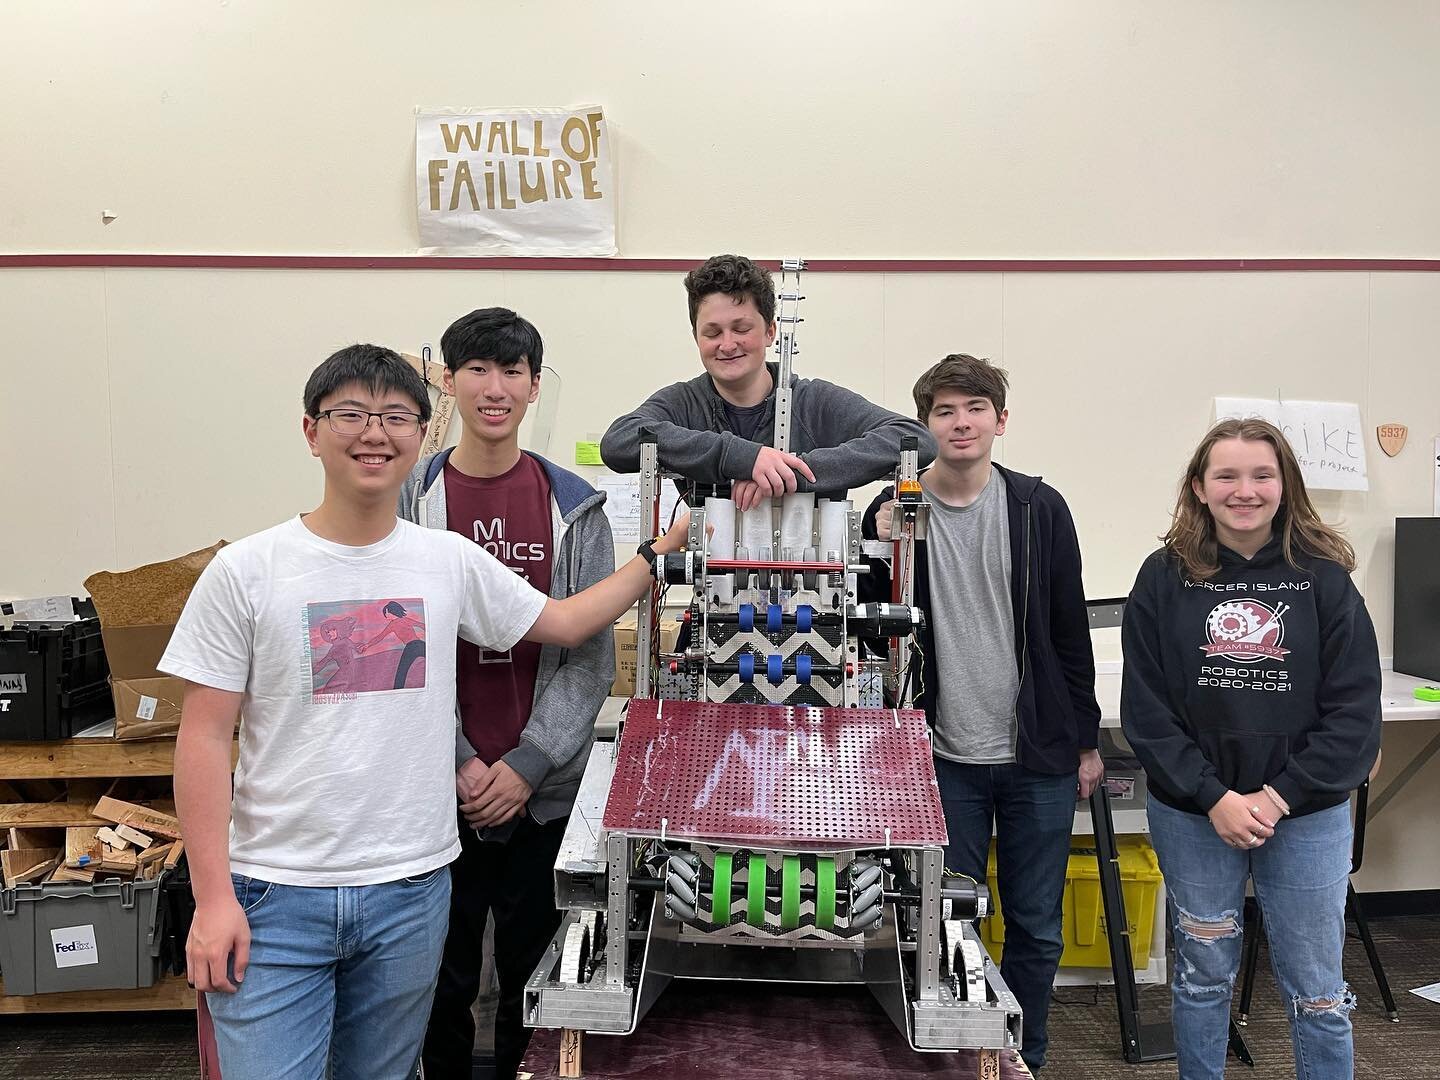 We will miss you seniors! Thank you for all of your hard work and dedication throughout the years!
And thank you Torrey for sticking with us and being our advisor!
Thank you for a great year team! Can&rsquo;t wait for next year and build a robot all 